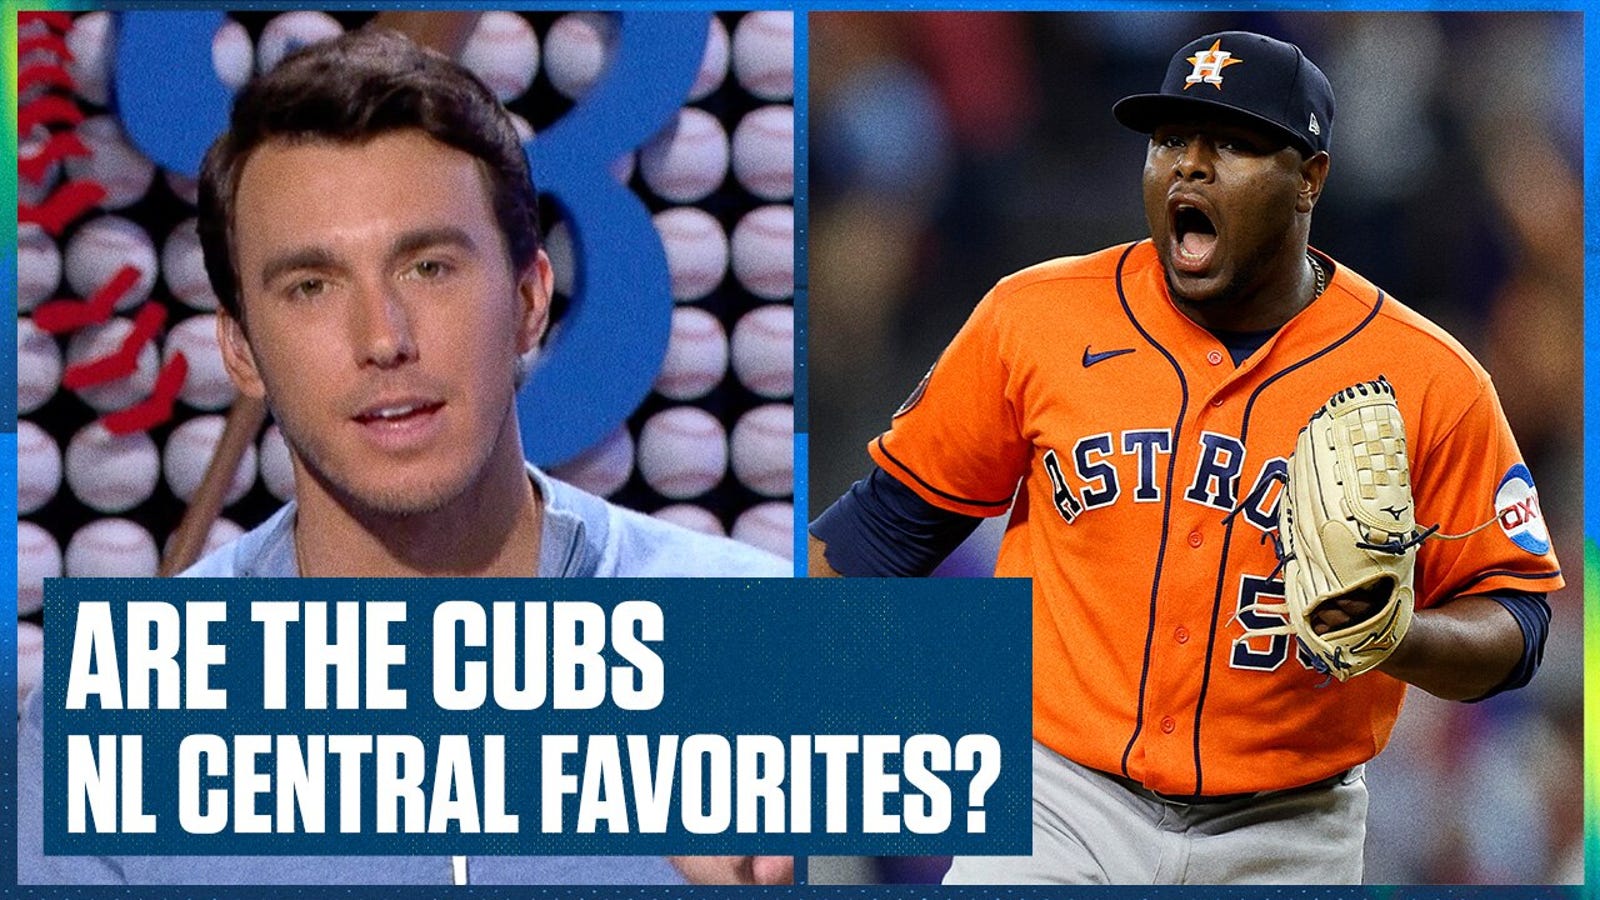 Should the Cubs be the favorites in the NL Central?